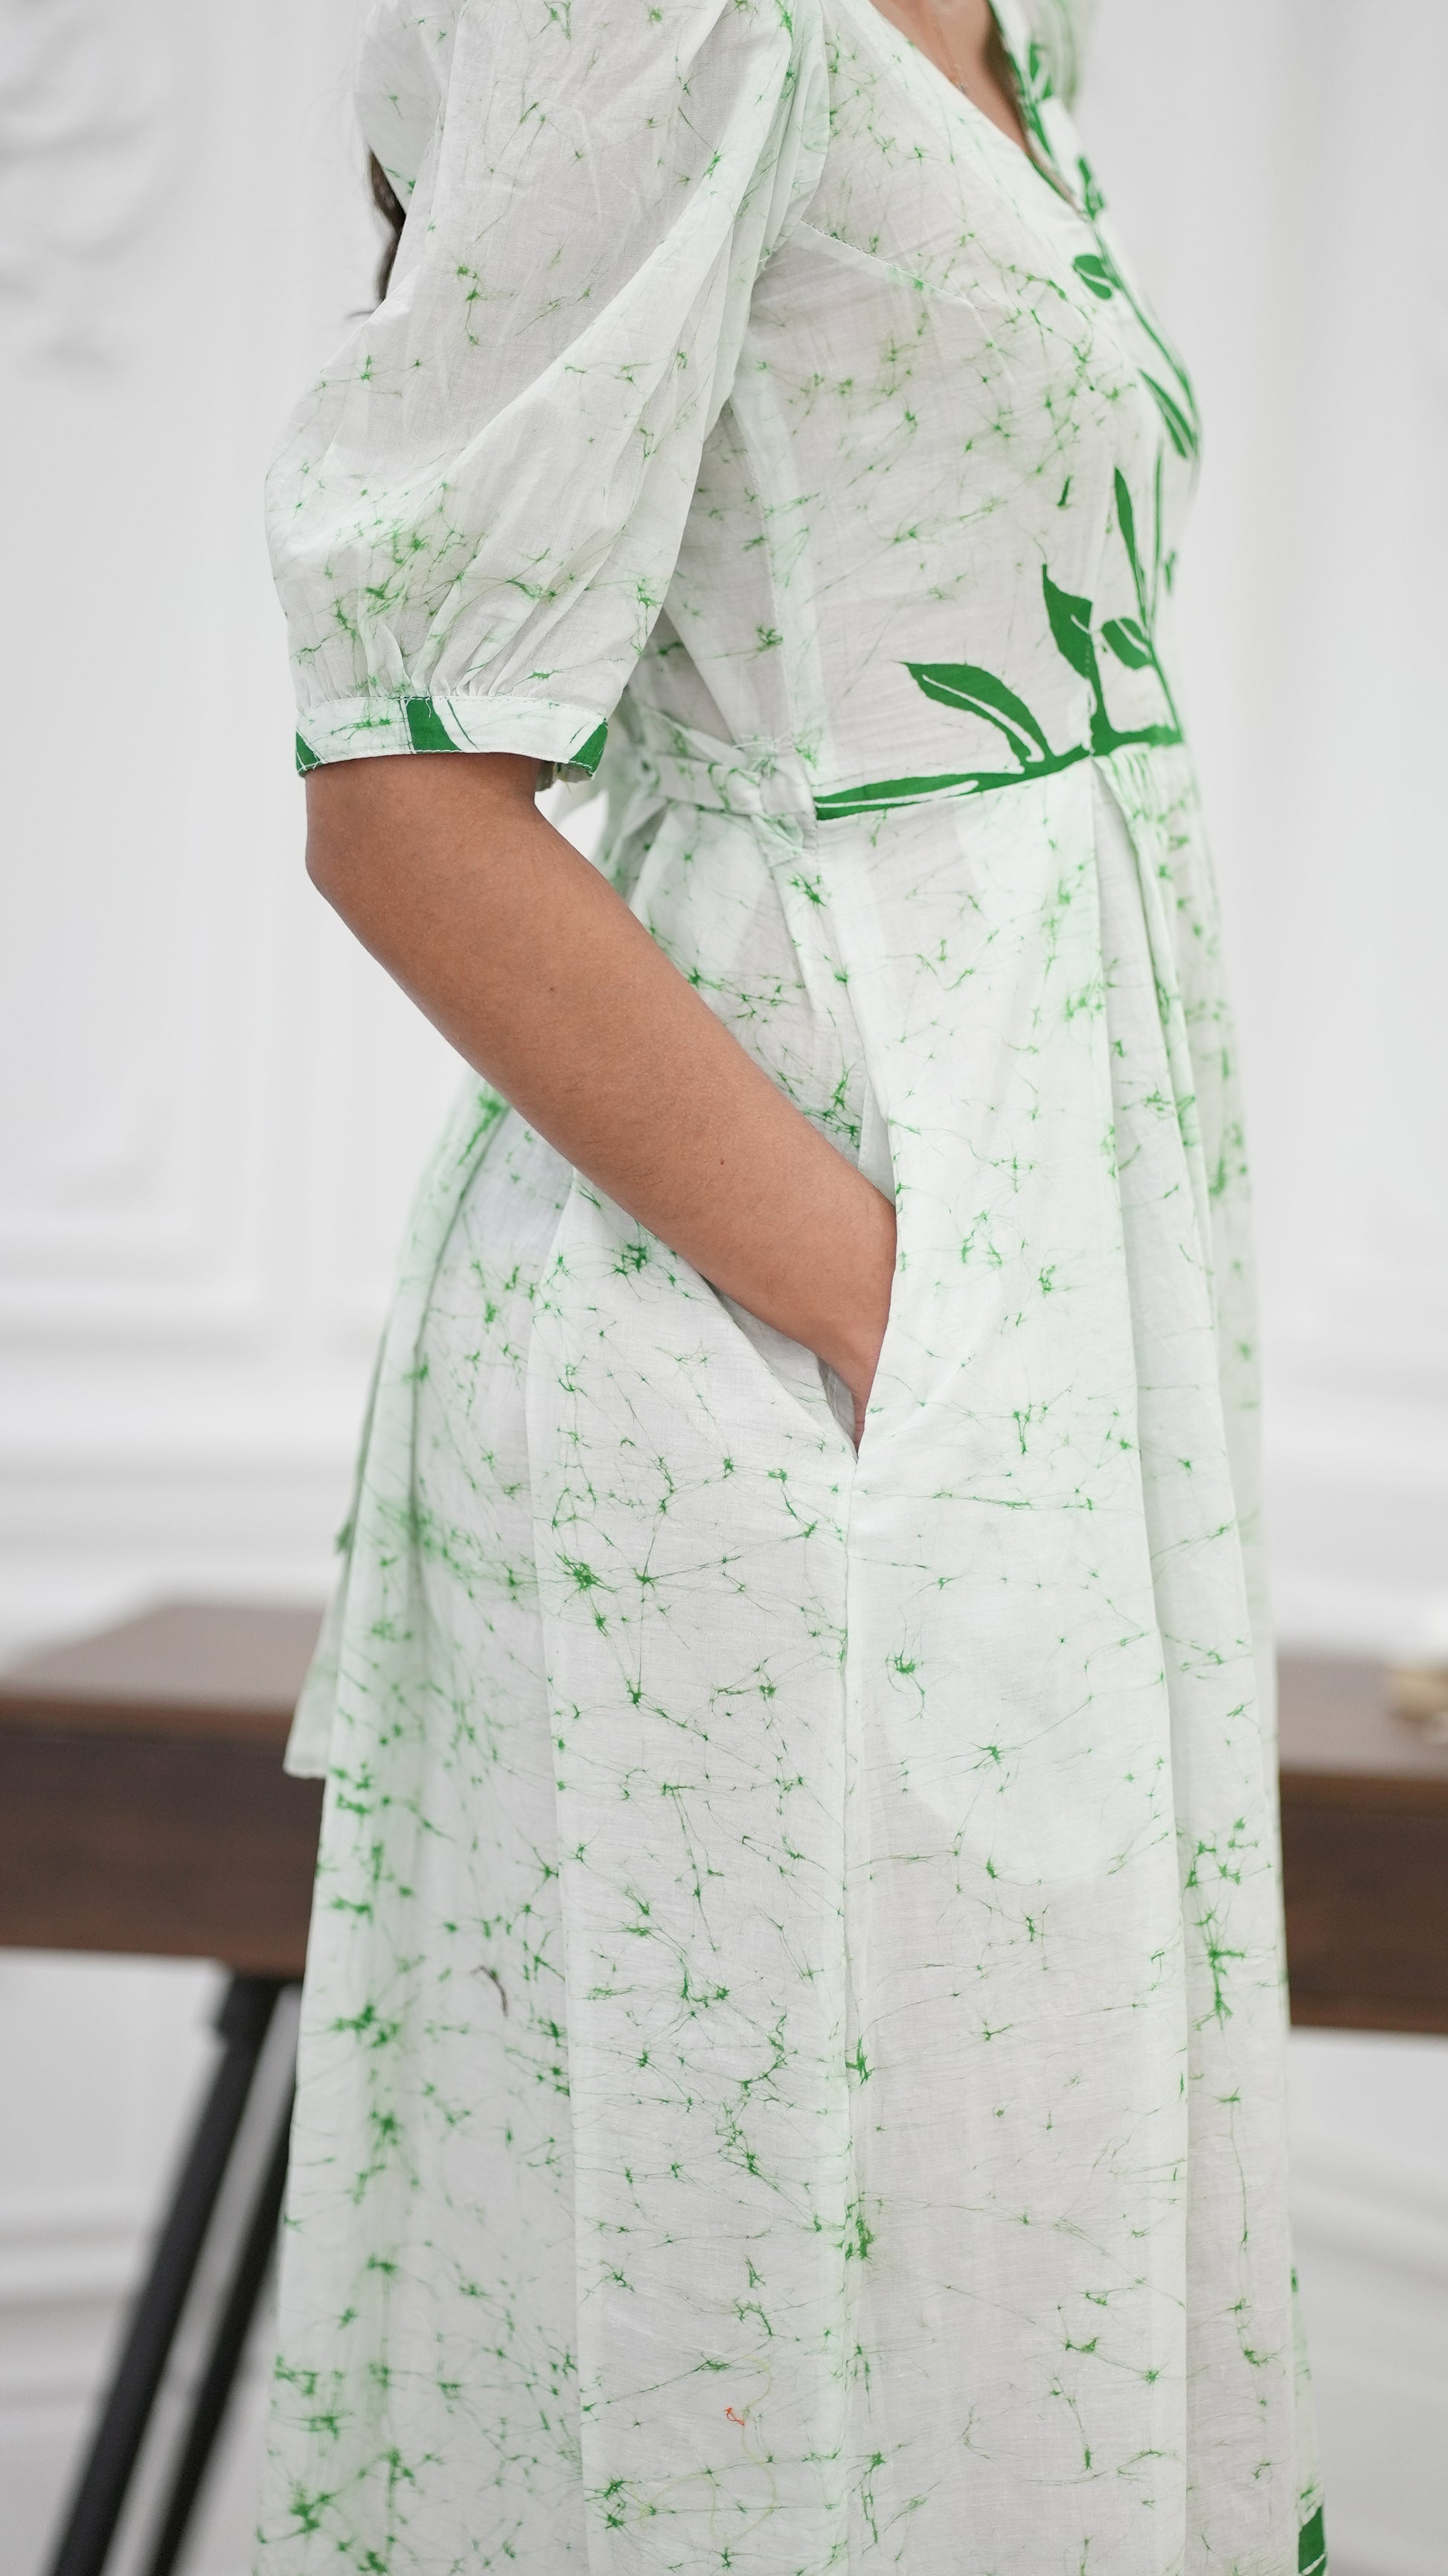 Cotton Collection celebrates new beginnings with whimsical Spring line -  Adaderana Biz English